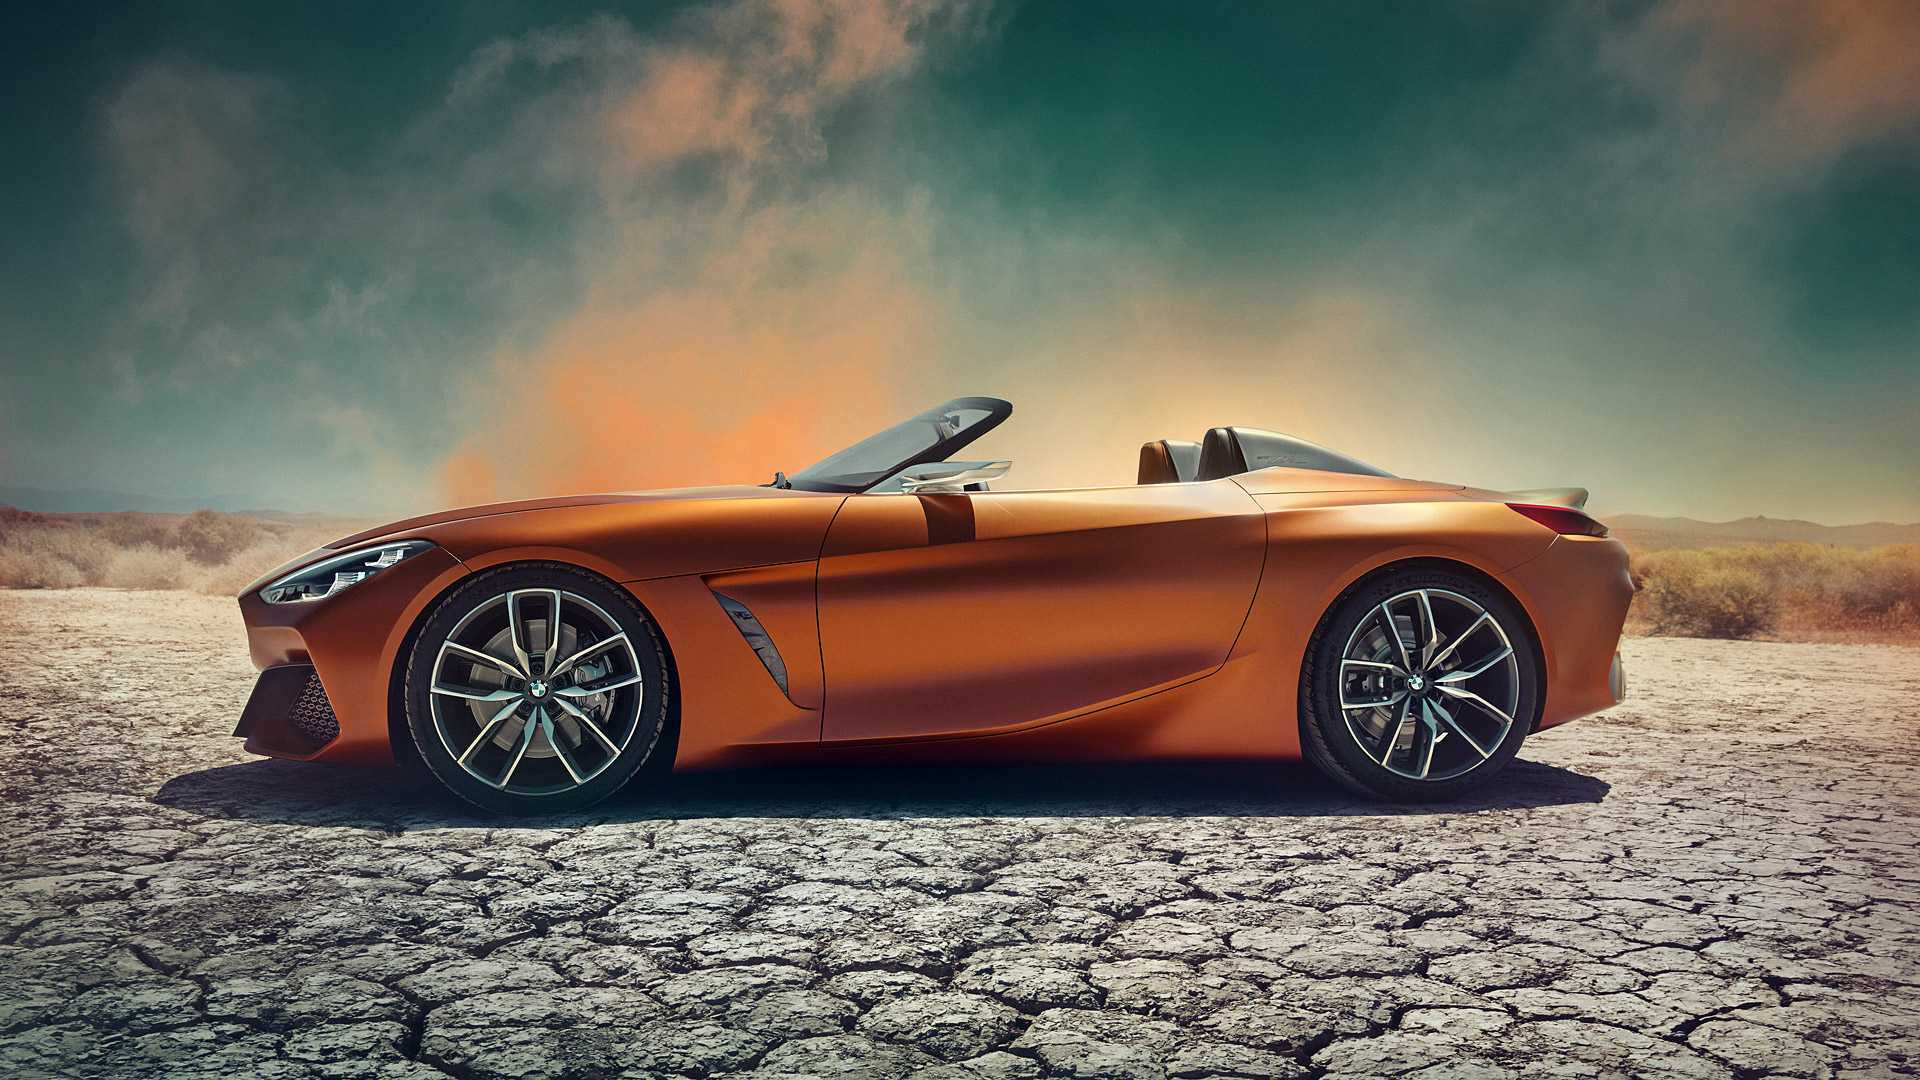 Bmw Z4 Wallpapers Concept Bmw Z4 Wallpapers For Smartphone - Bmw One Off Concept Car - HD Wallpaper 